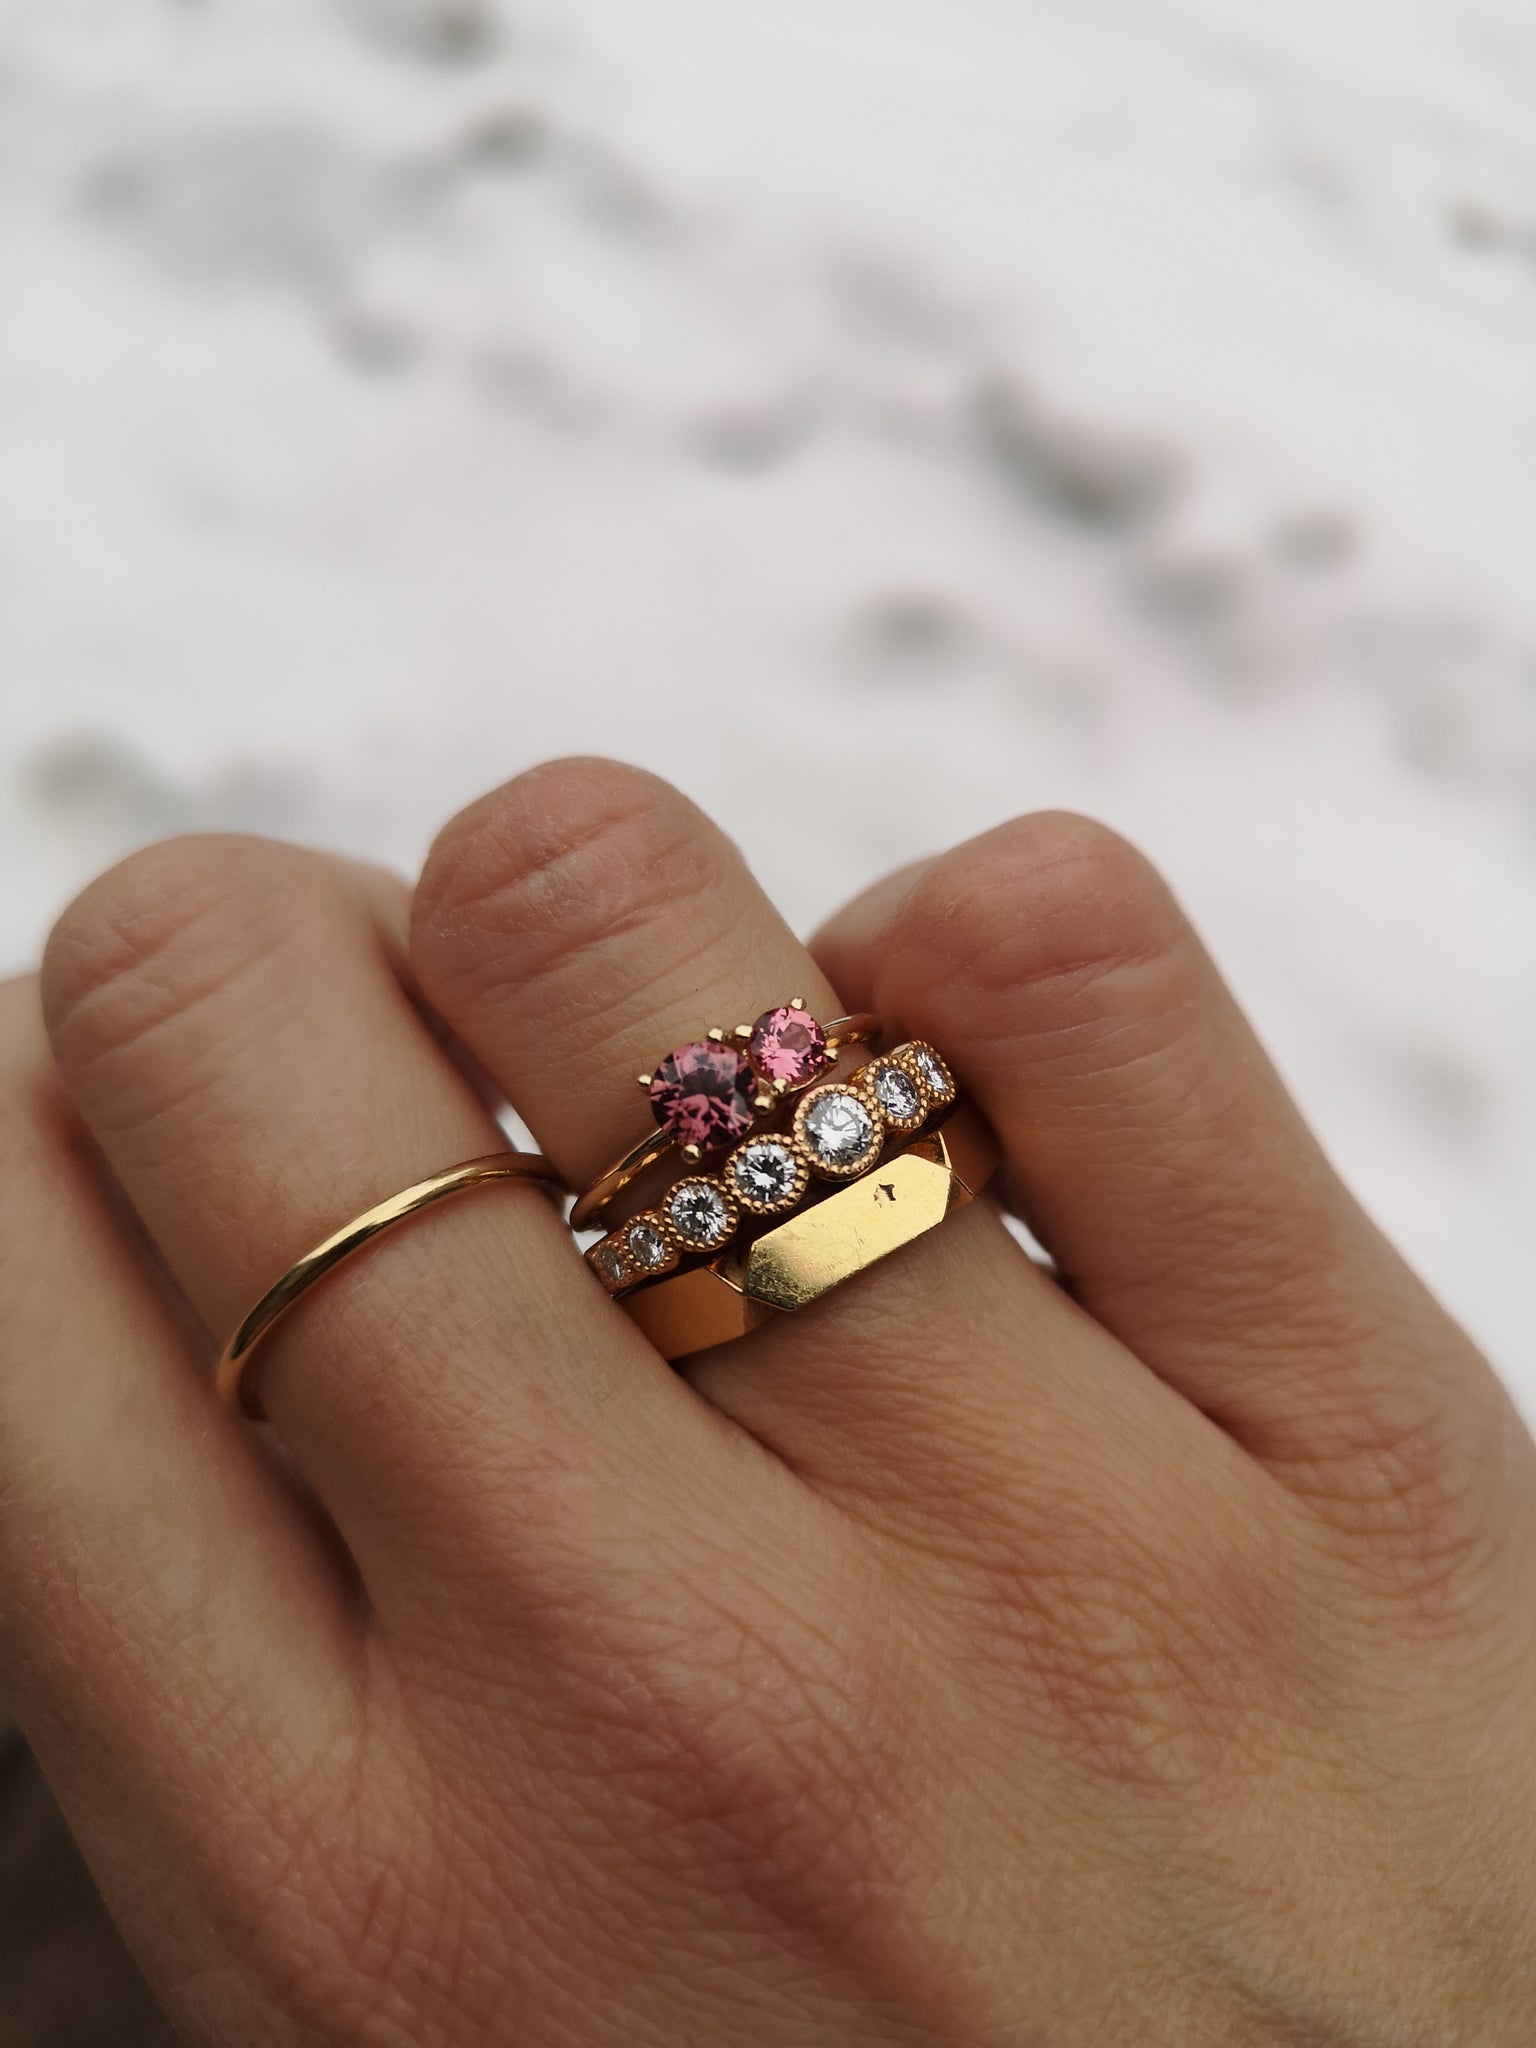 Wear the Muted Rose ring from Lico Jewelry as a stacking ring or alone for a pop of color. Featuring a natural pink-brown zircon and pink spinel set in 14k yellow gold. December and August birthstones. Available now from Lico Jewelry in Montreal.